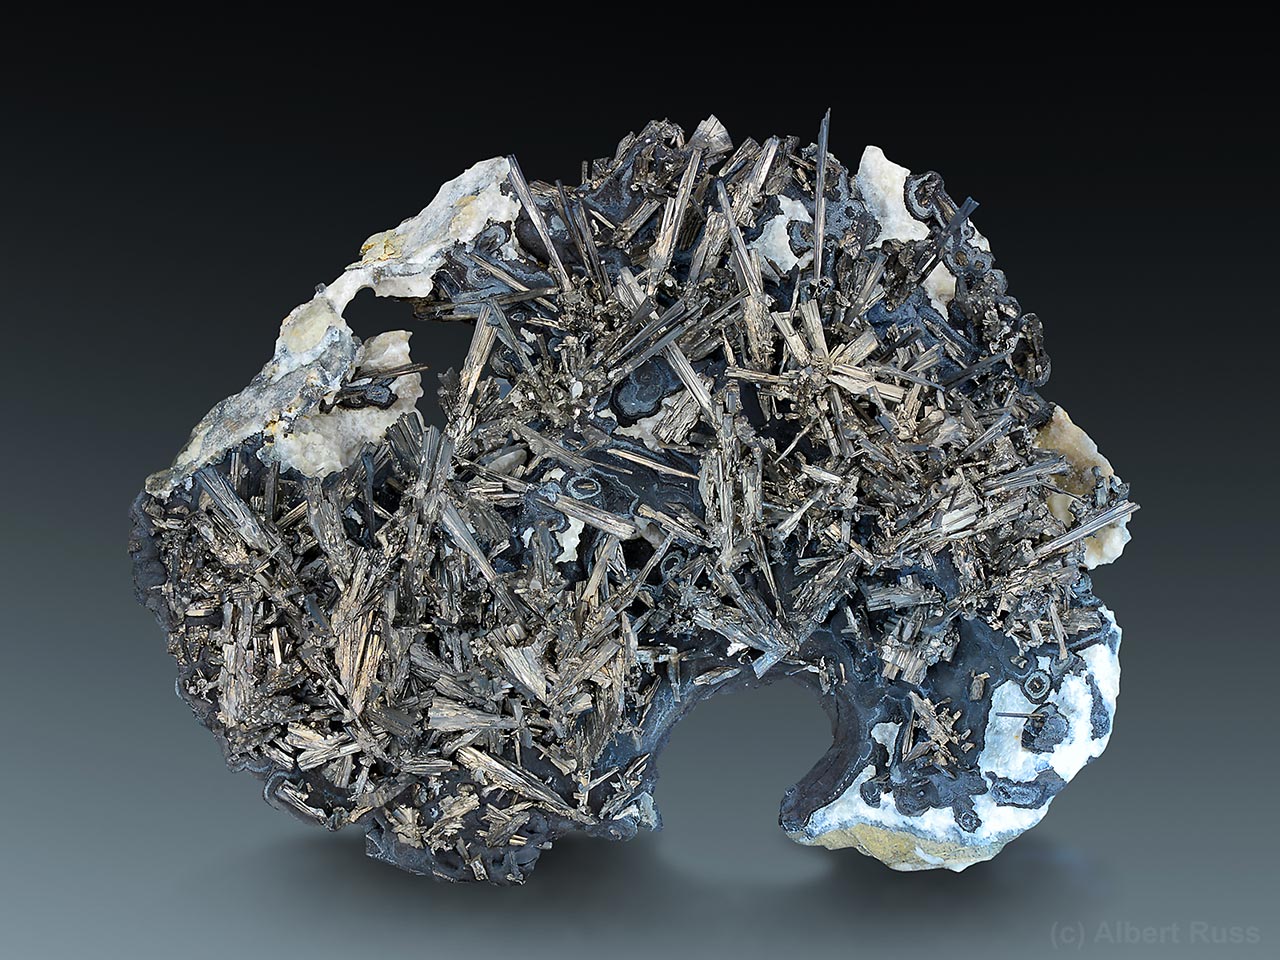 Silver dyscrasite crystals with dark arsenic and white calcite from Příbram, Czech Republic